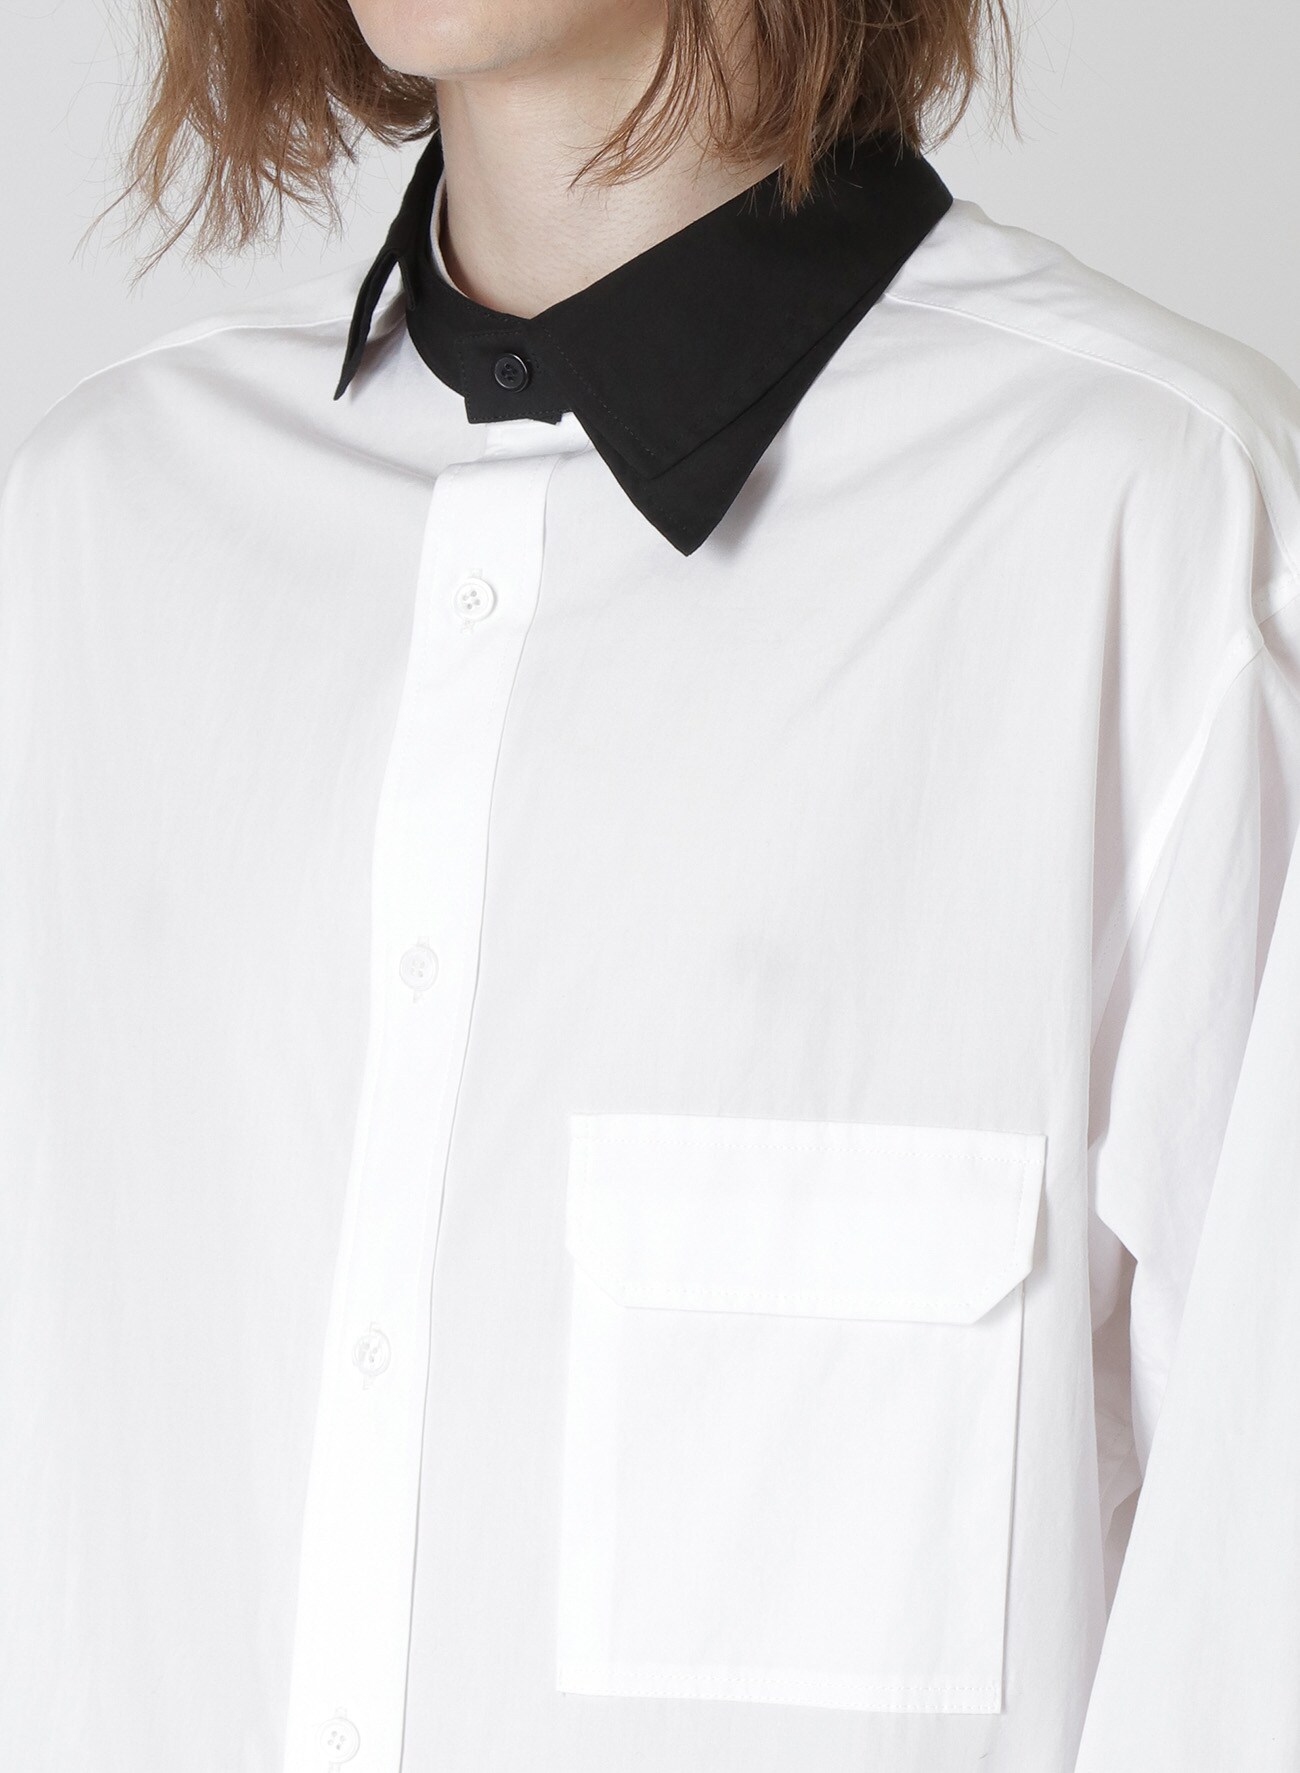 100/2 BROAD A-ASYMMETRY SPARE DOUBLE COLLARS B